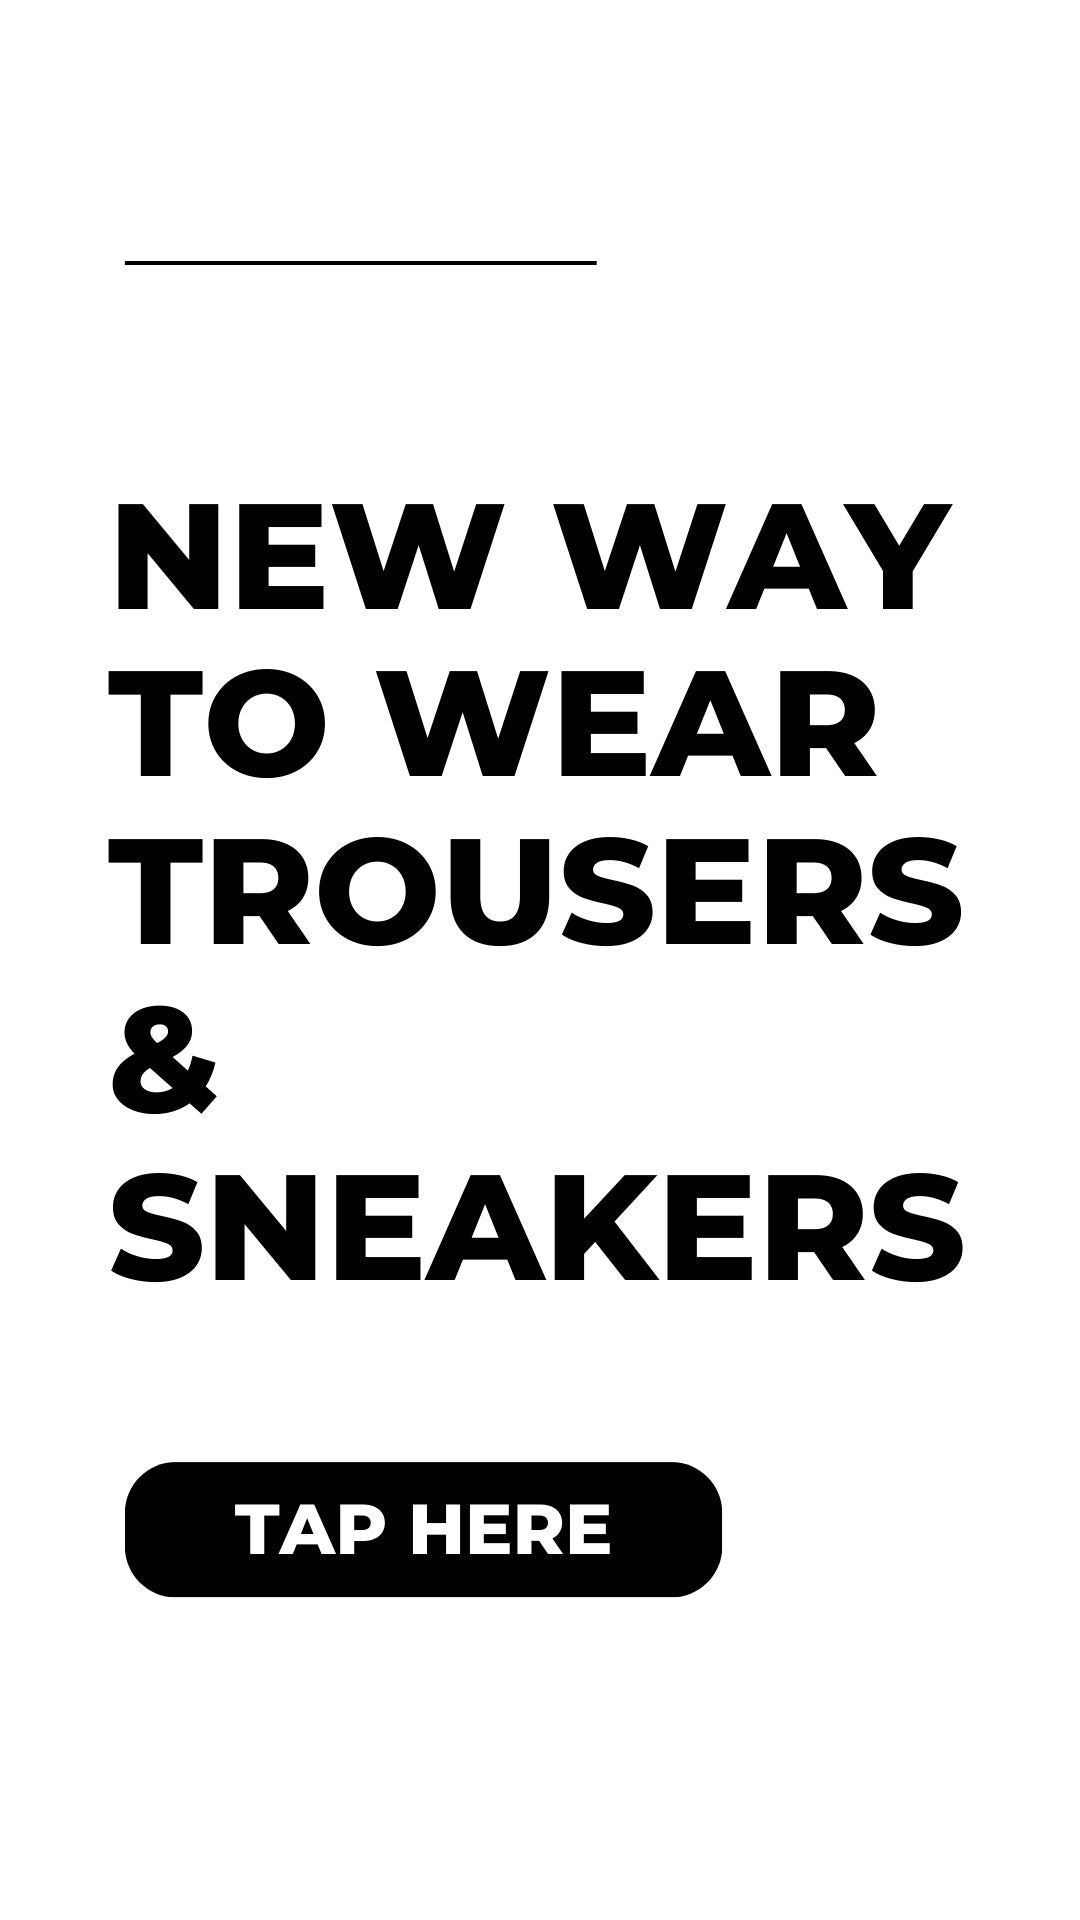 New Way To Wear Trousers & Sneakers